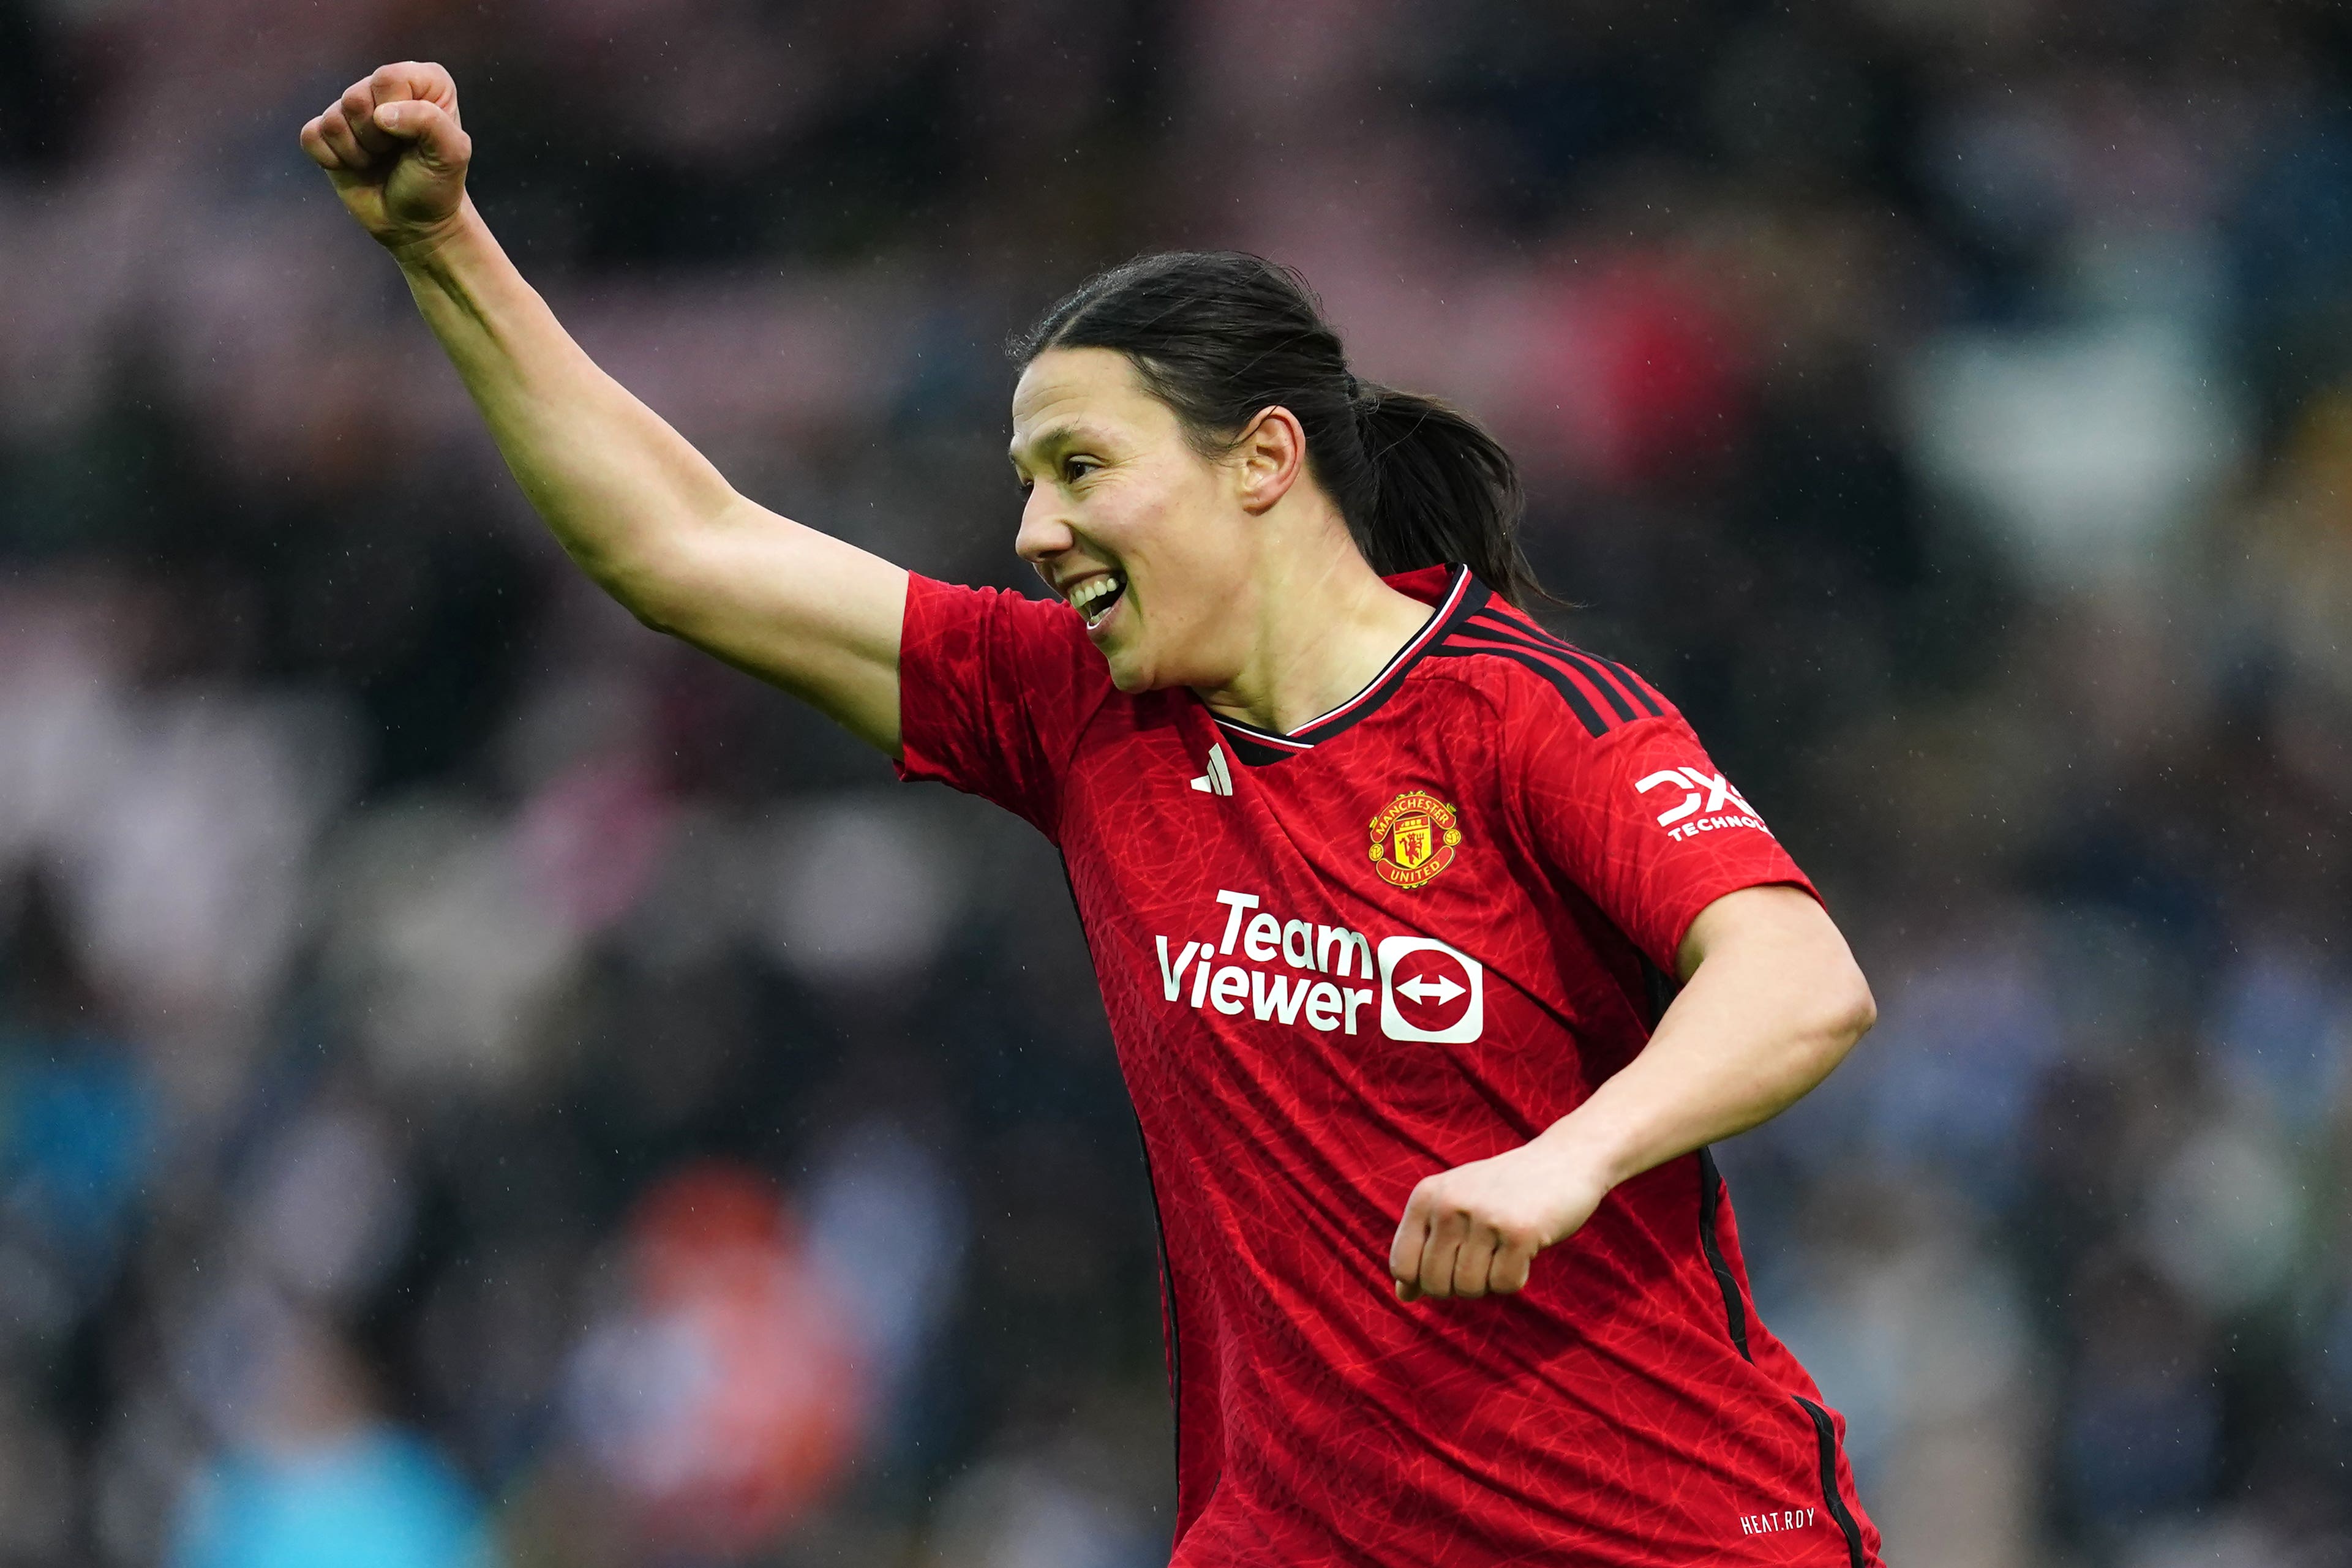 pa ready, birmingham, wembley, super league, notts county, england, rachel williams seeks ‘relief’ on personal mission to win fa cup with man utd